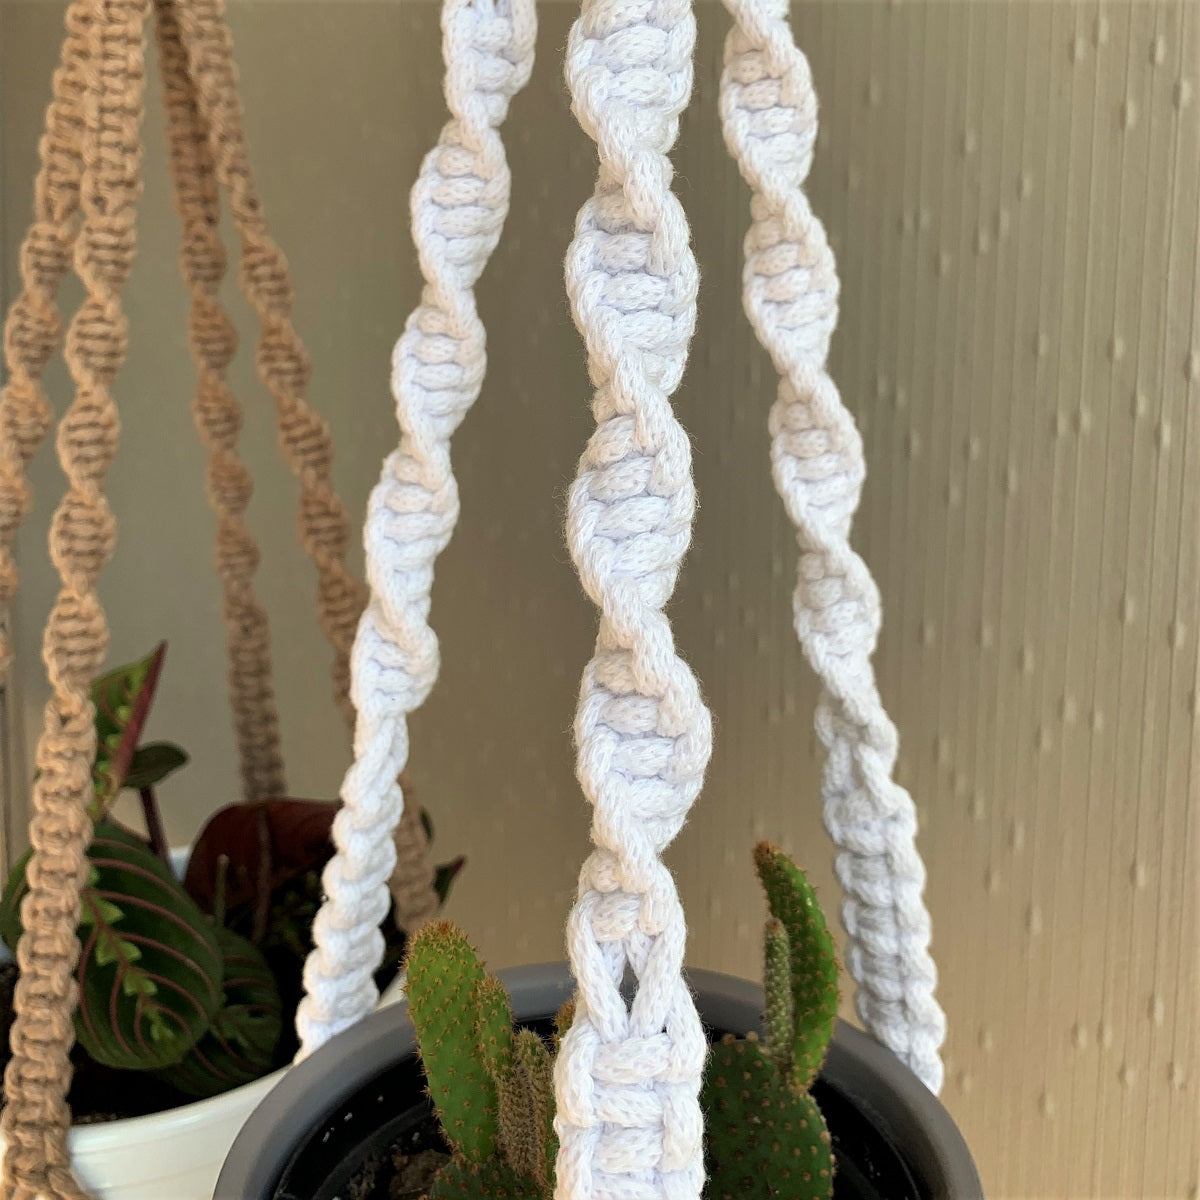 A close up photo of the macrame knots on two macrame plant hangers